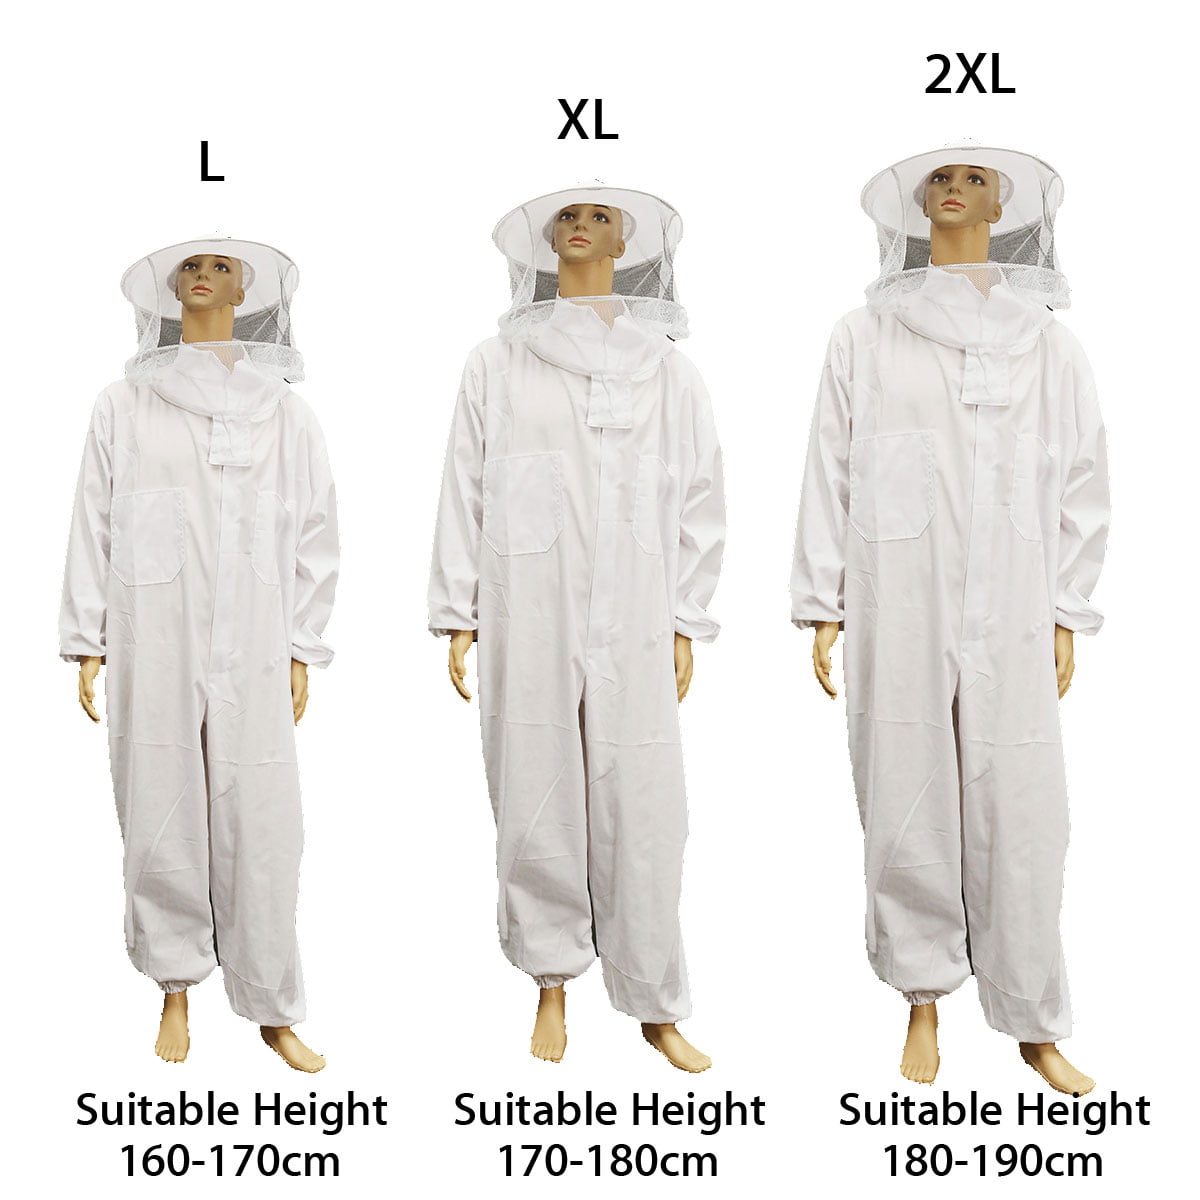 L Mumusuki Beekeeping Suit Professional Beekeeping Foldable Fencing Veil Coverall Bee Protecting Suit Smock with Front Zipper